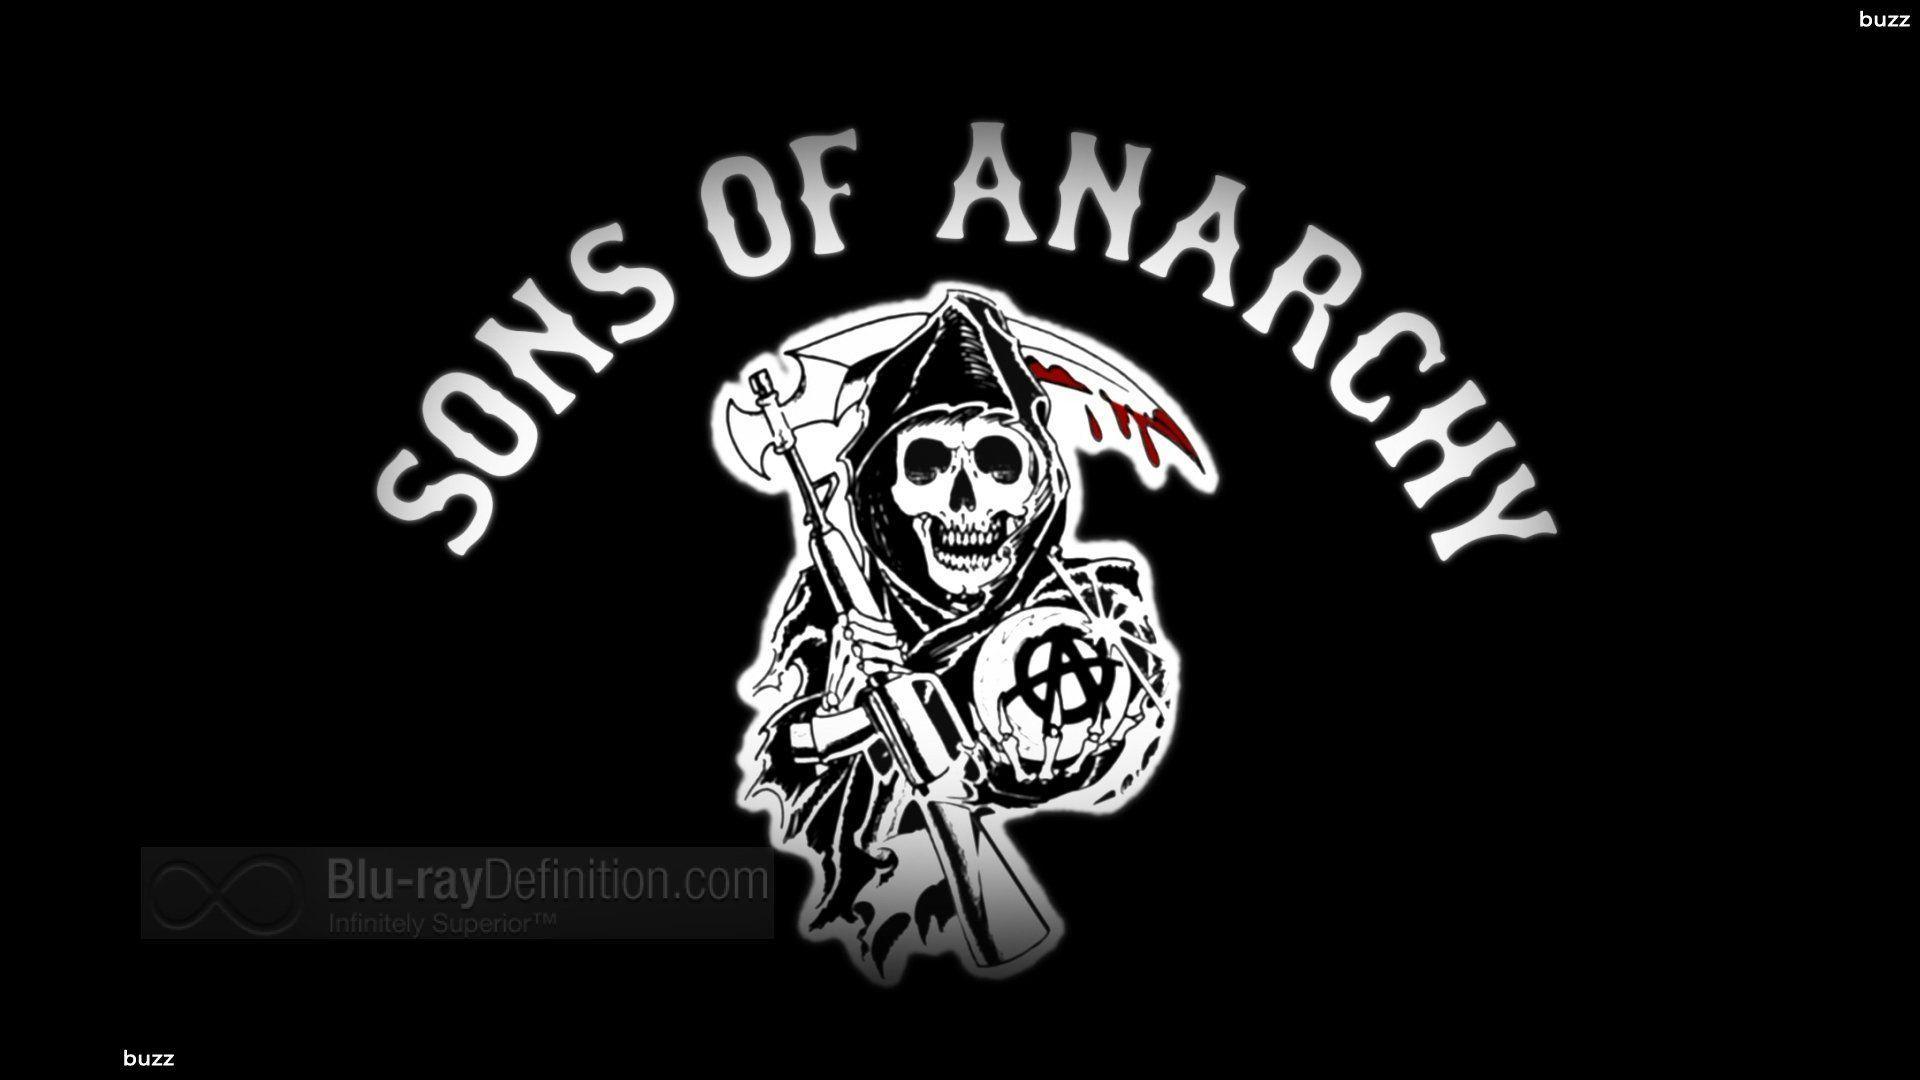 Sons of anarchy logo HD Wallpaper